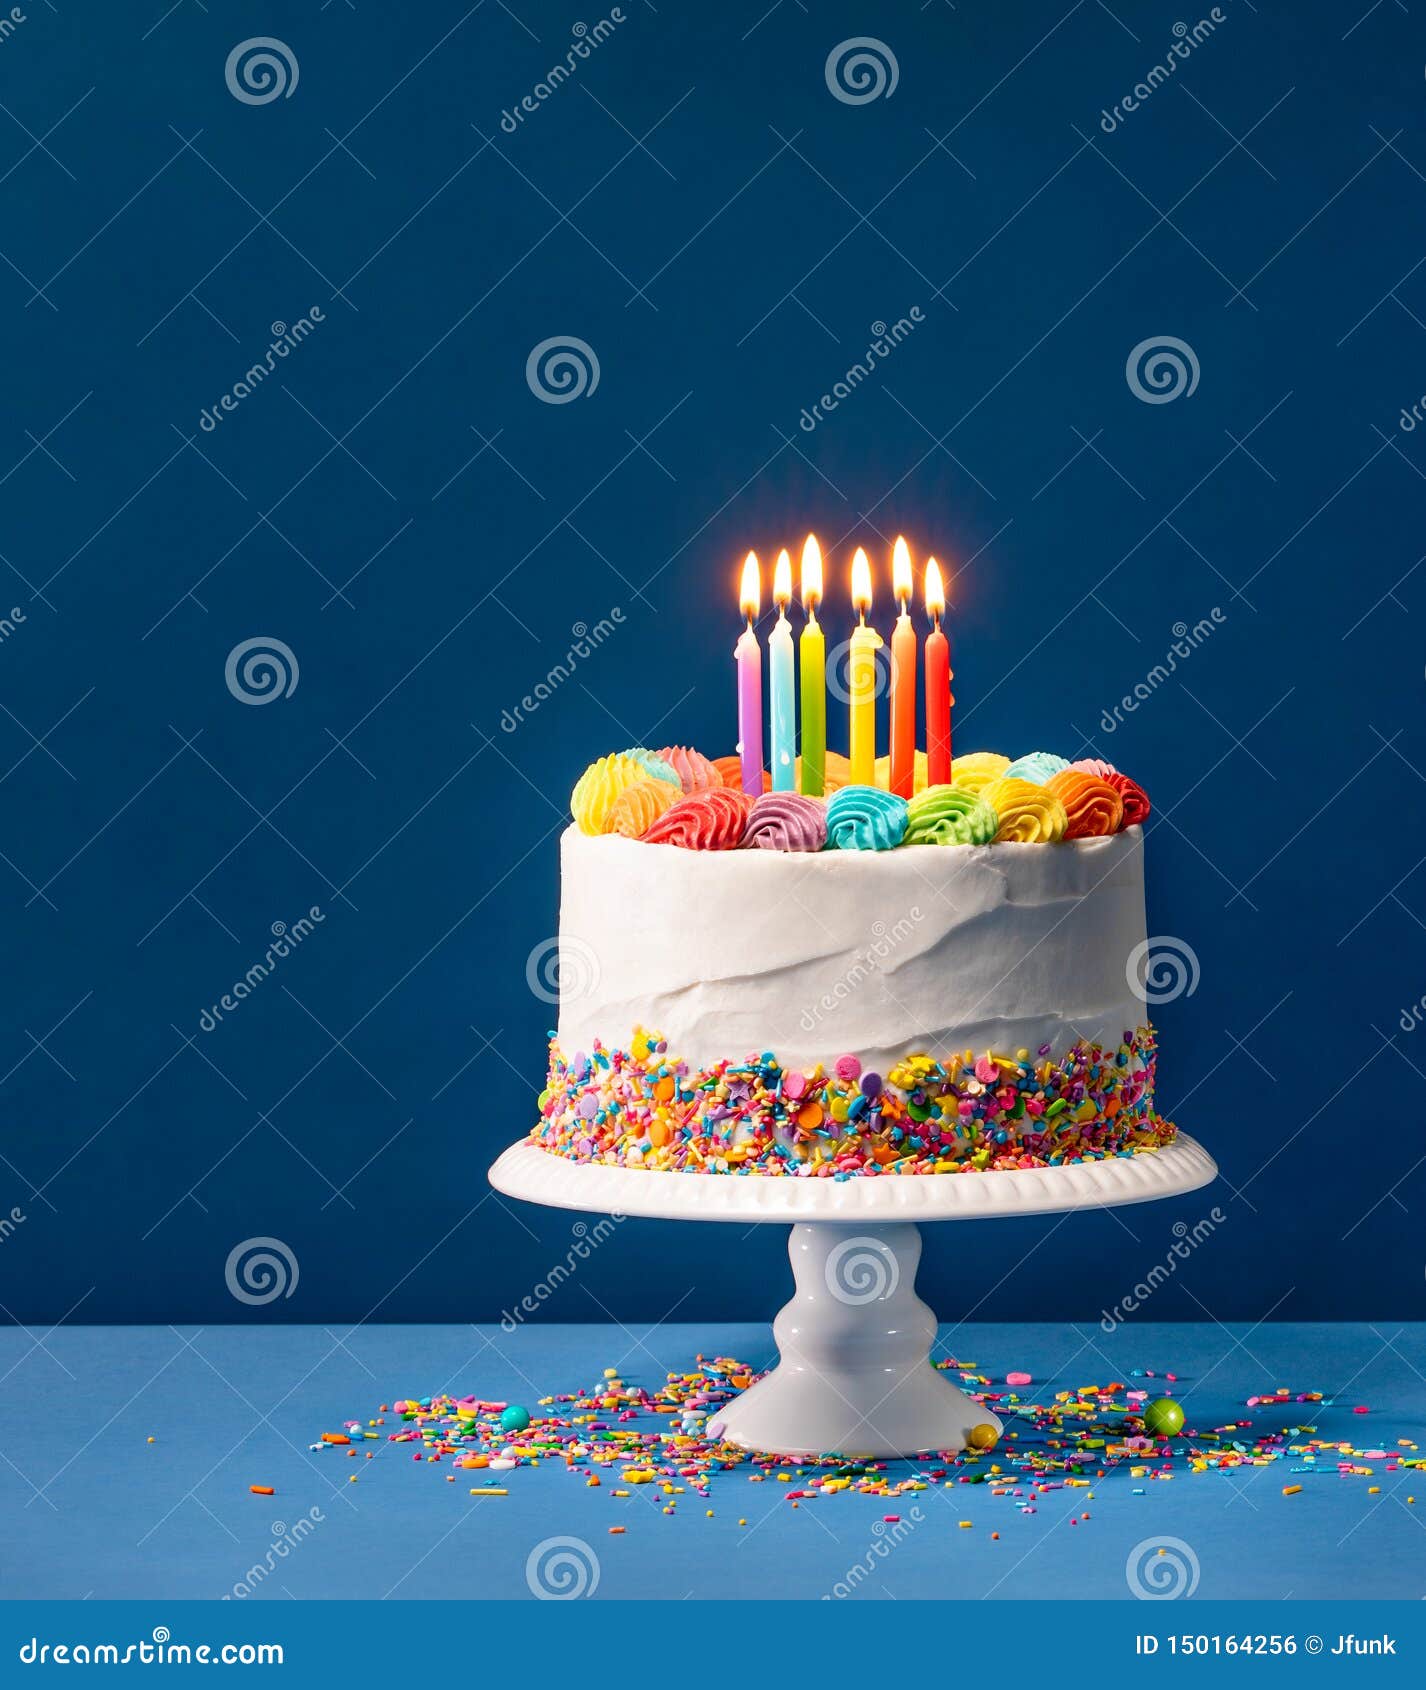 Colorful Birthday Cake over Blue. Birthday cake with rainbow icing, colorful Sprinkles and lit candles over a blue background